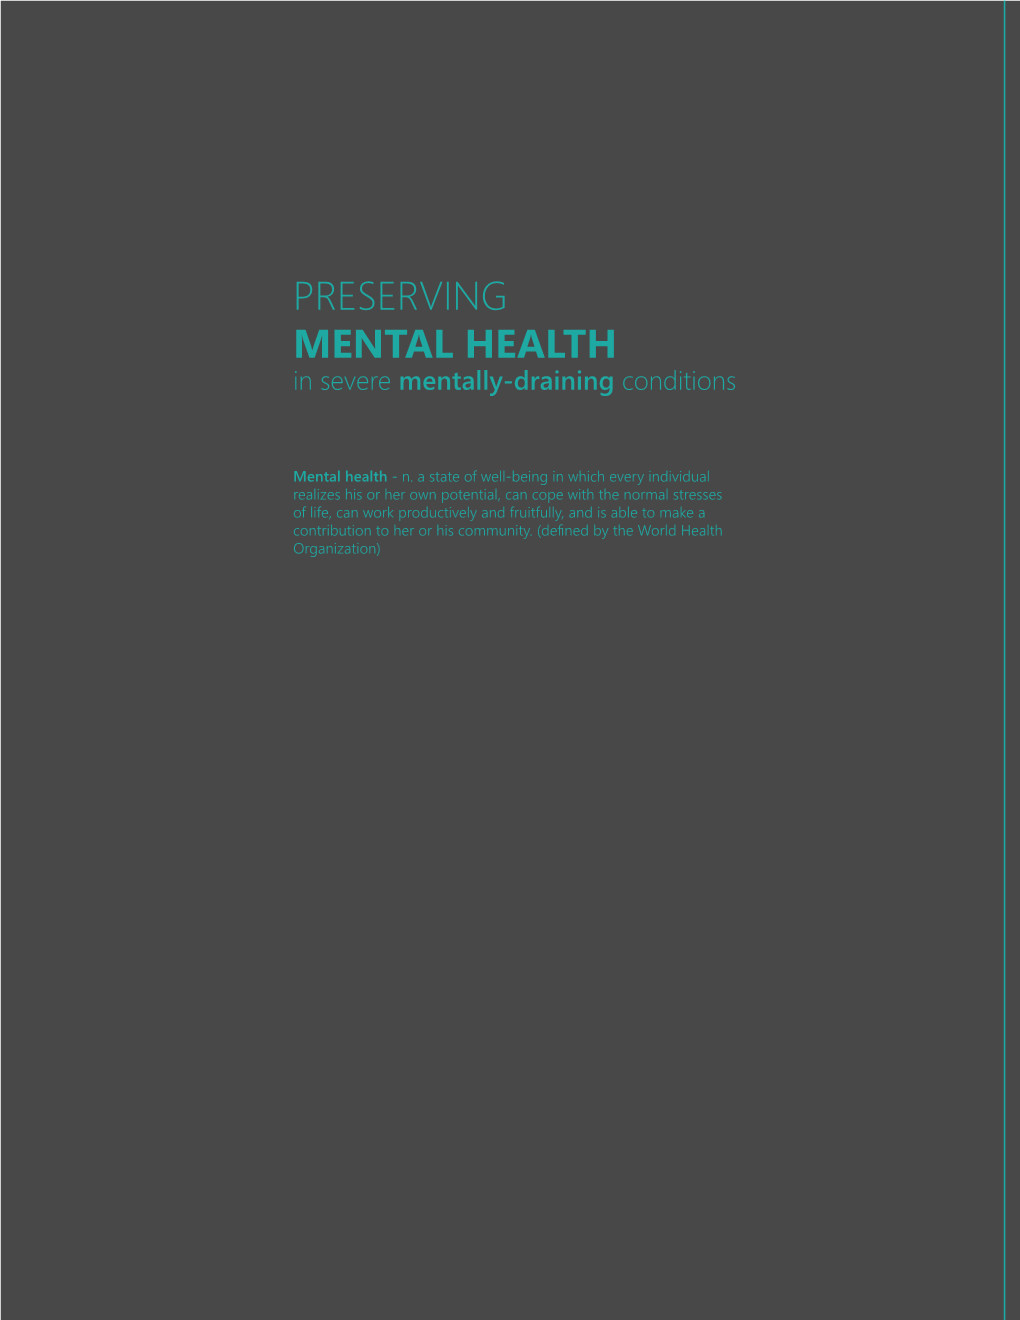 PRESERVING MENTAL HEALTH in Severe Mentally-Draining Conditions